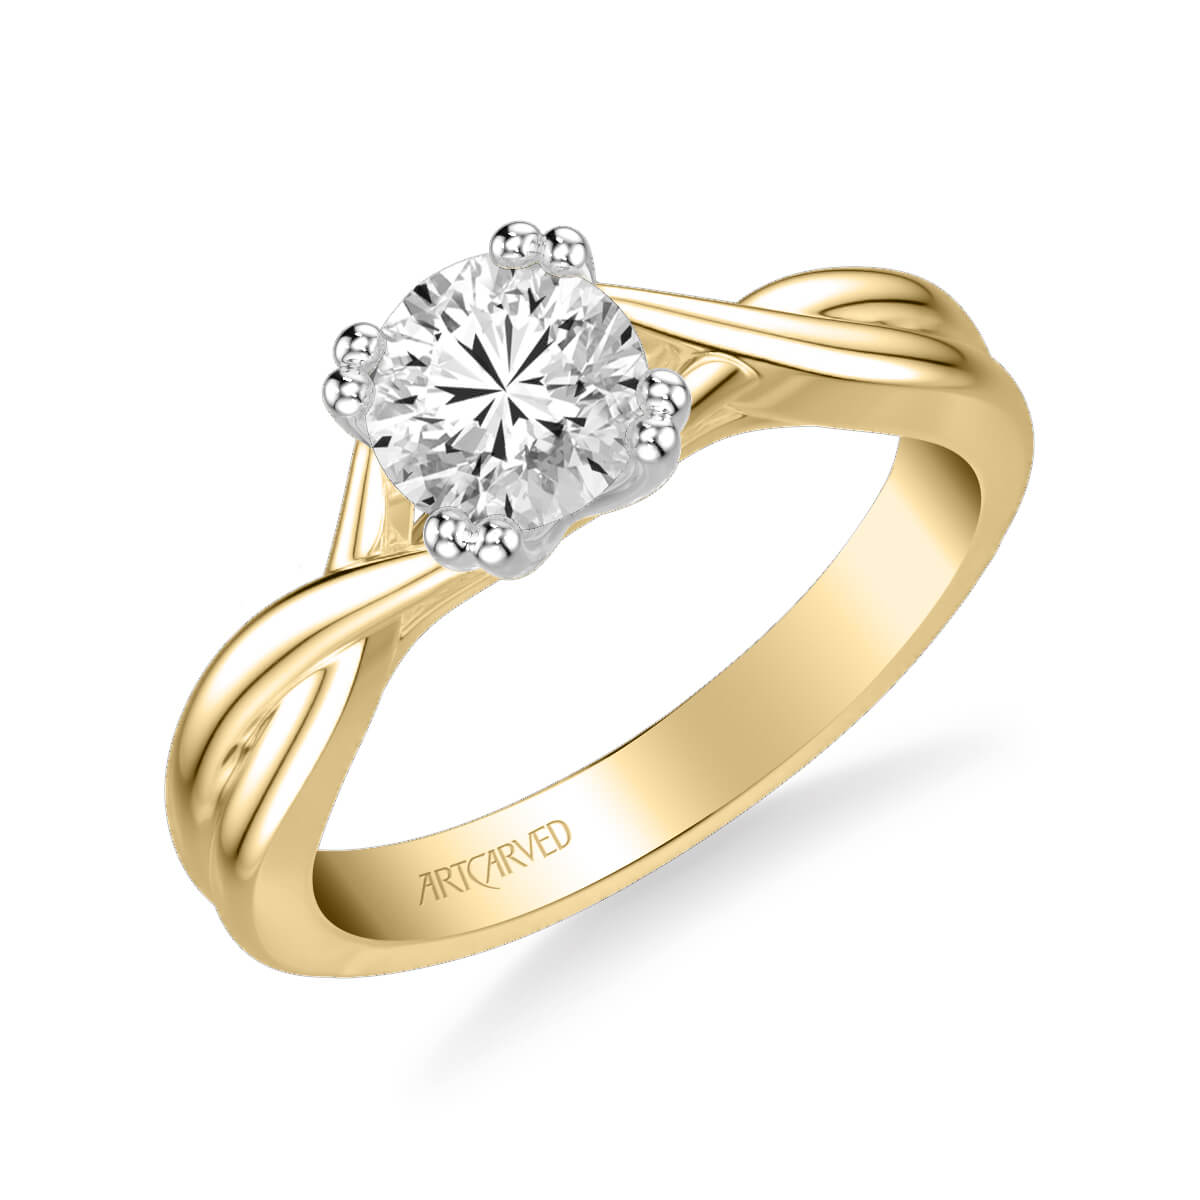 Why Solitaire Diamond Rings For Ring Ceremony!